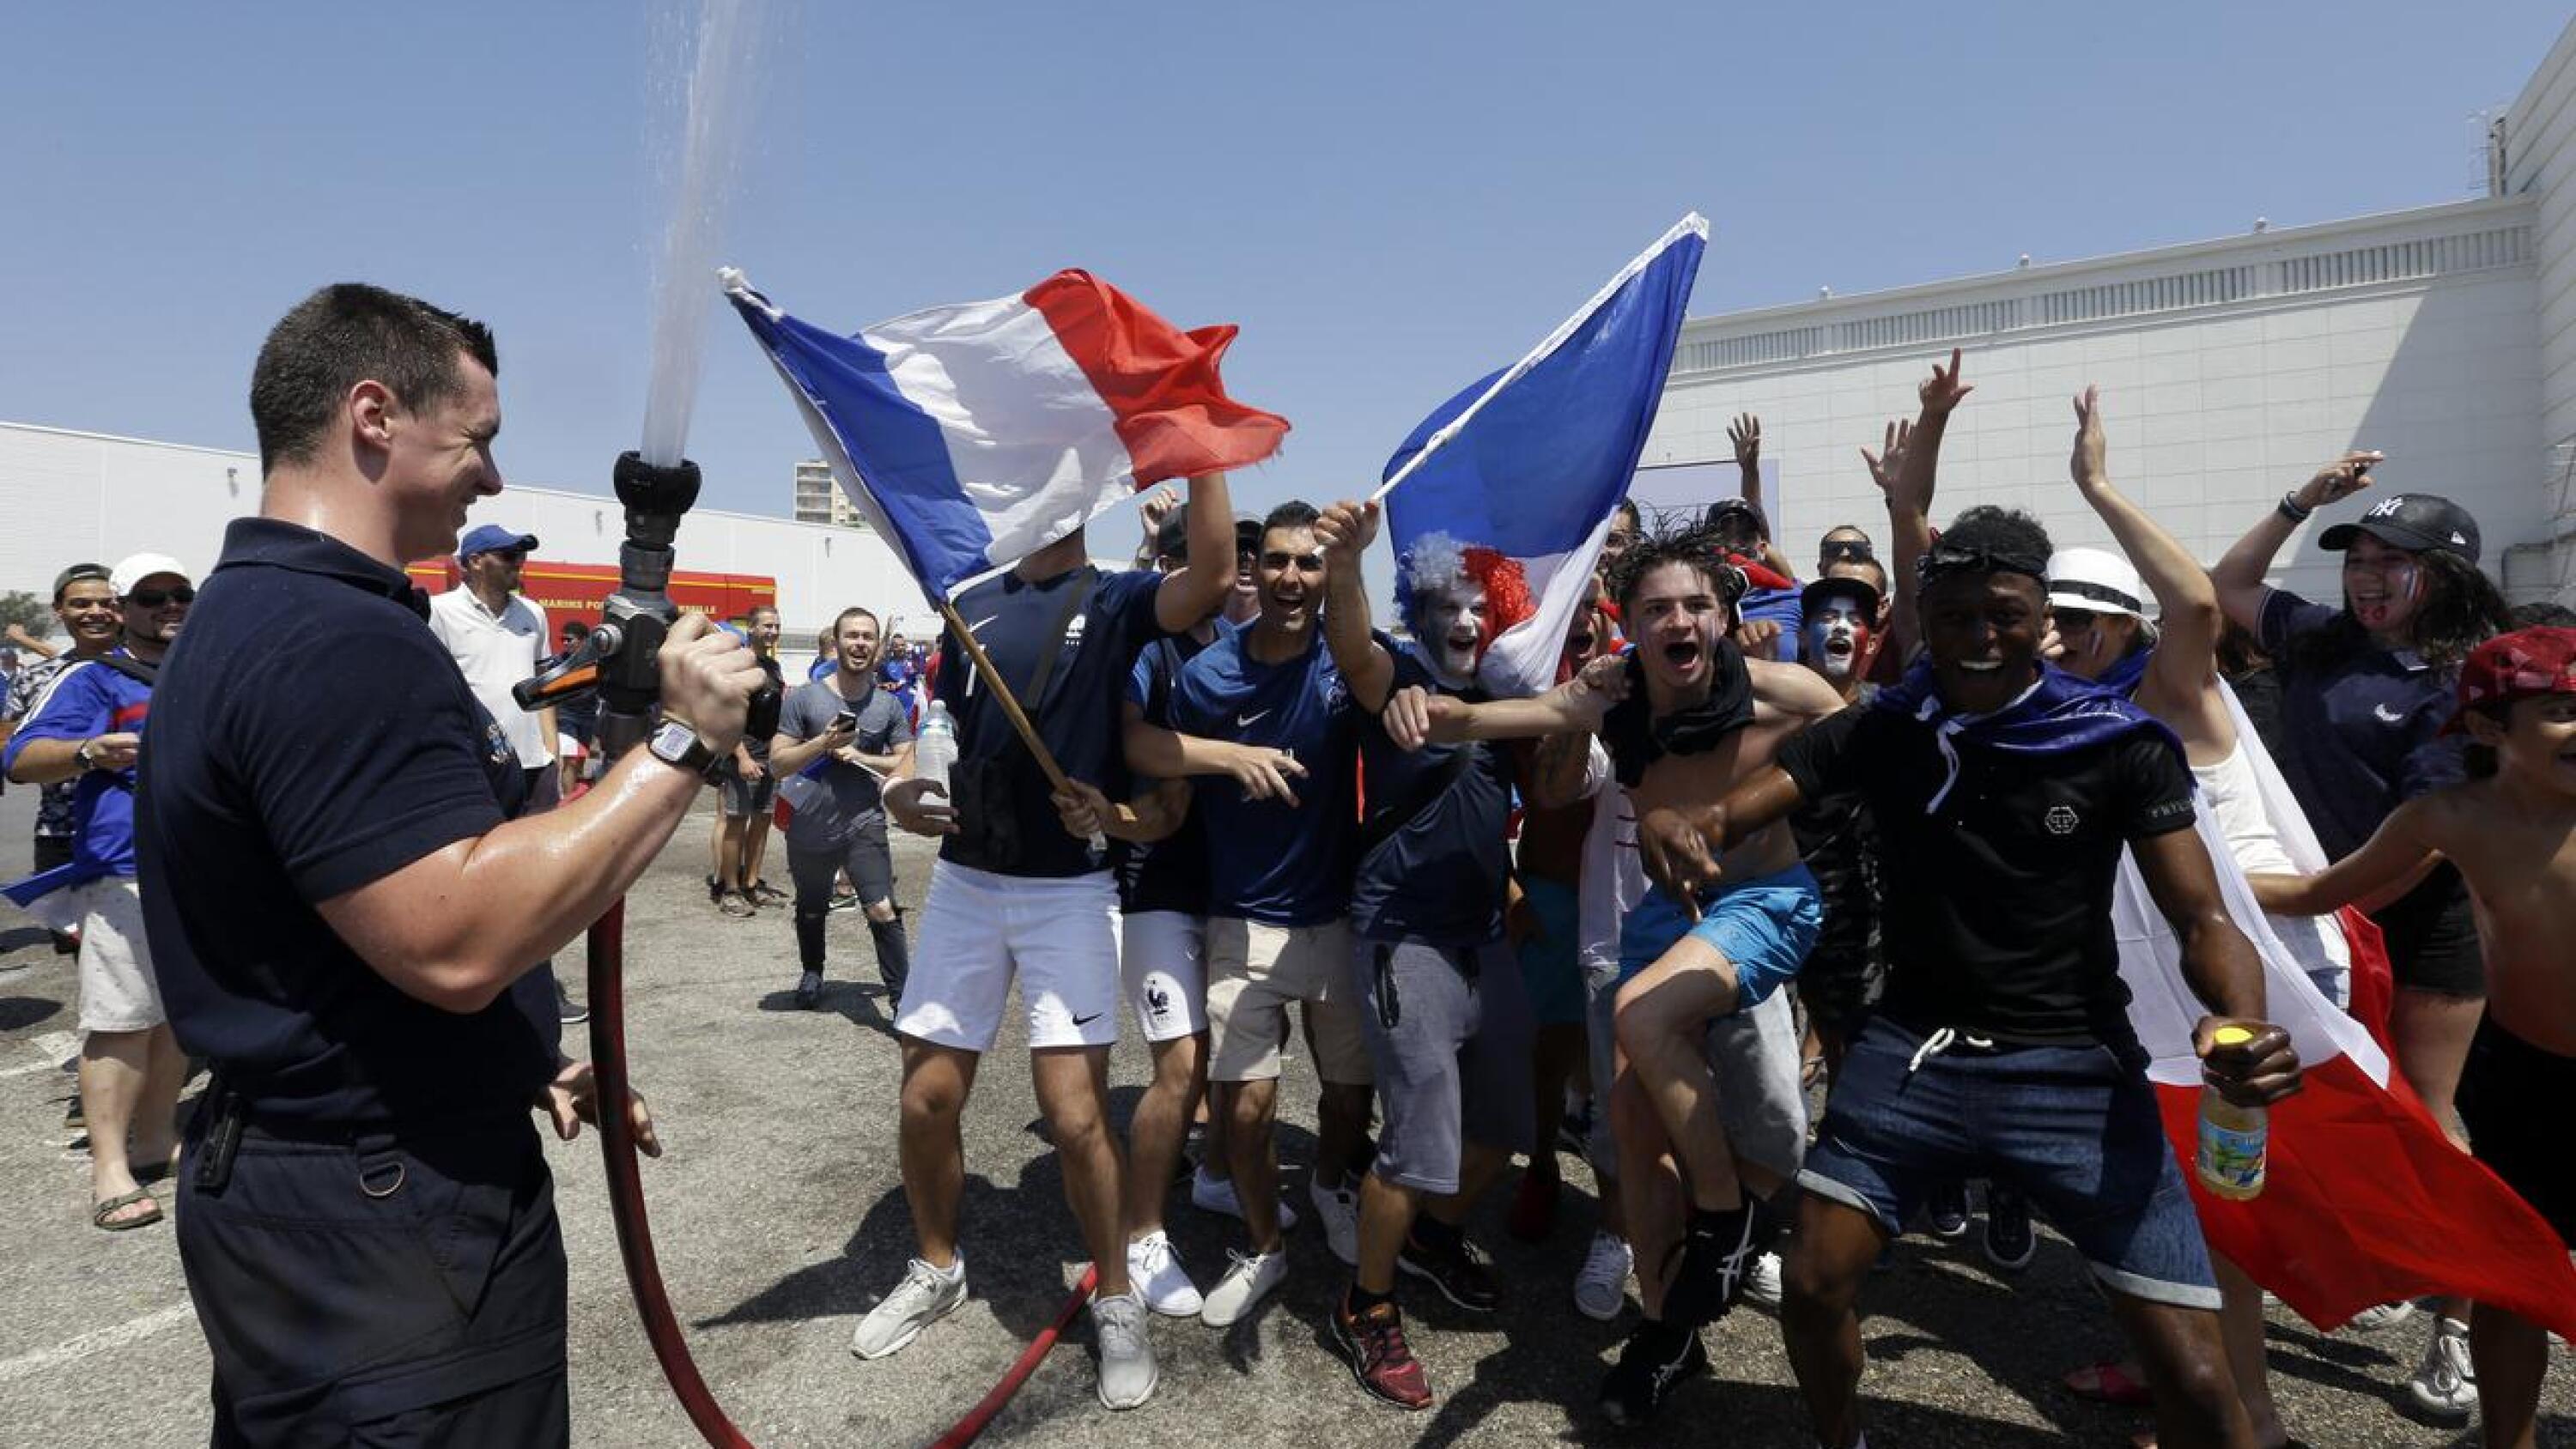 A firefighter sprays water to cool off French supporters at a fan zone in Marseille prior to the World Cup final between France and Croatia